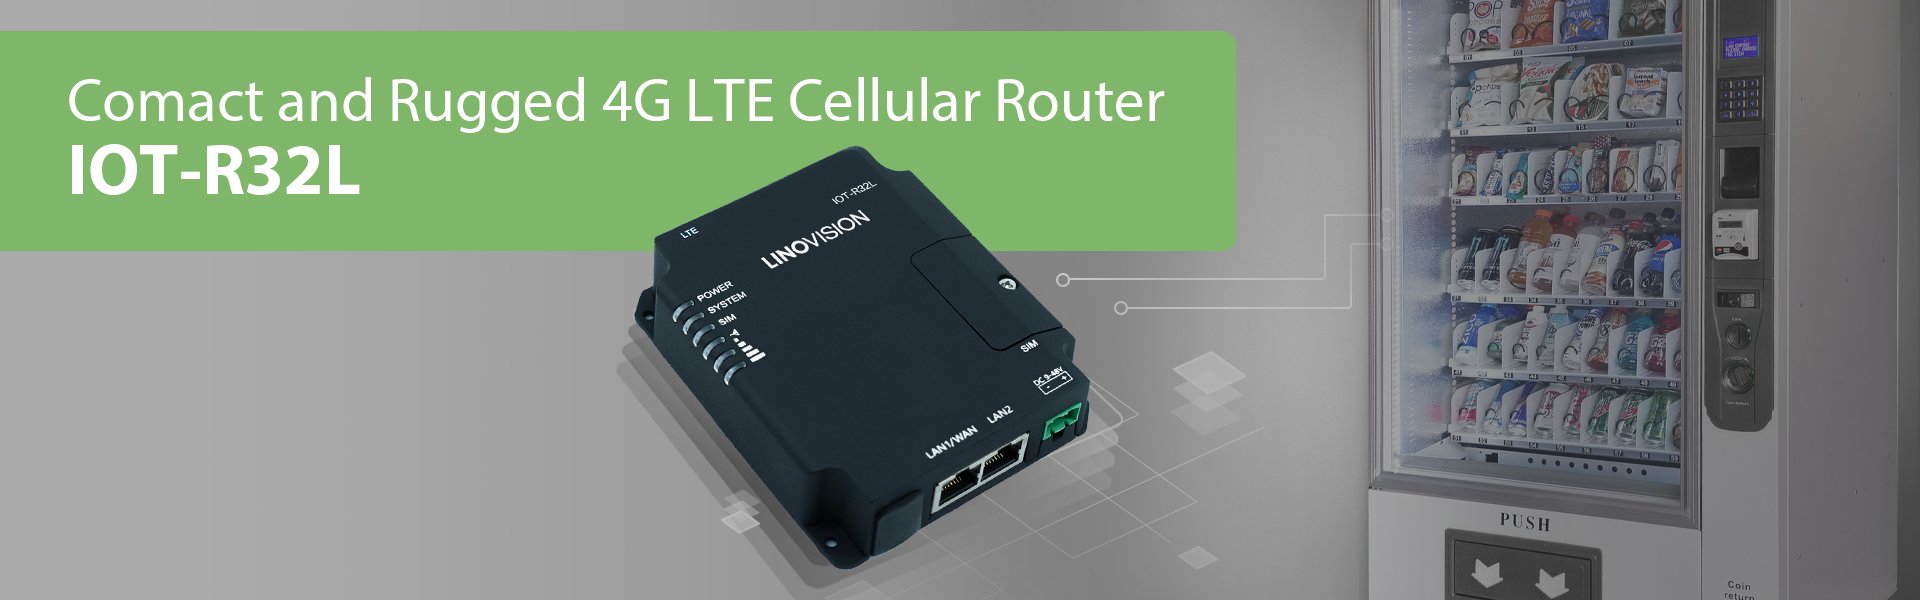 【Upgrade】 LINOVISION Industrial 4G LTE Router for AT&T, T-Mobile and  Verizon, Support WiFi, Dual SIM Cards, RS485, DI/DO, Secure VPN Access,  Cloud